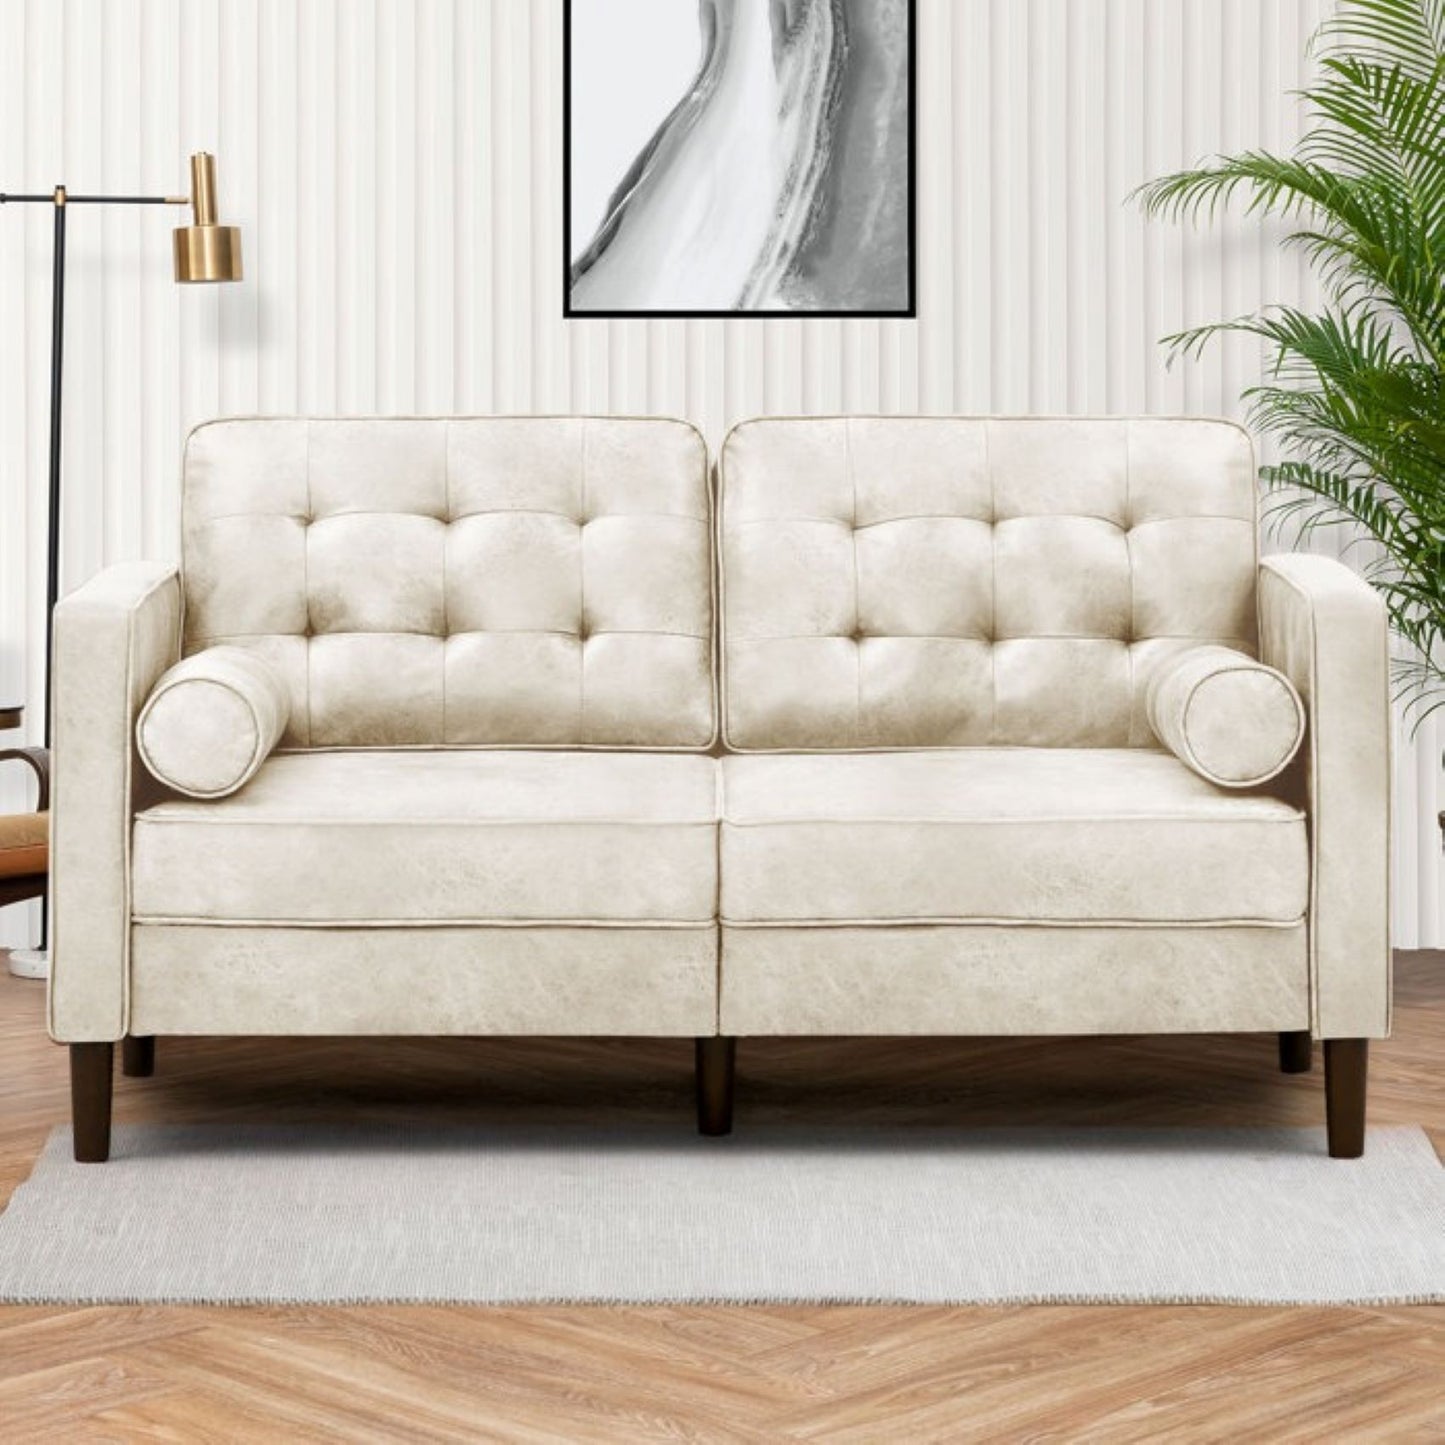 Drinel Leatherette Sofa for Living Room